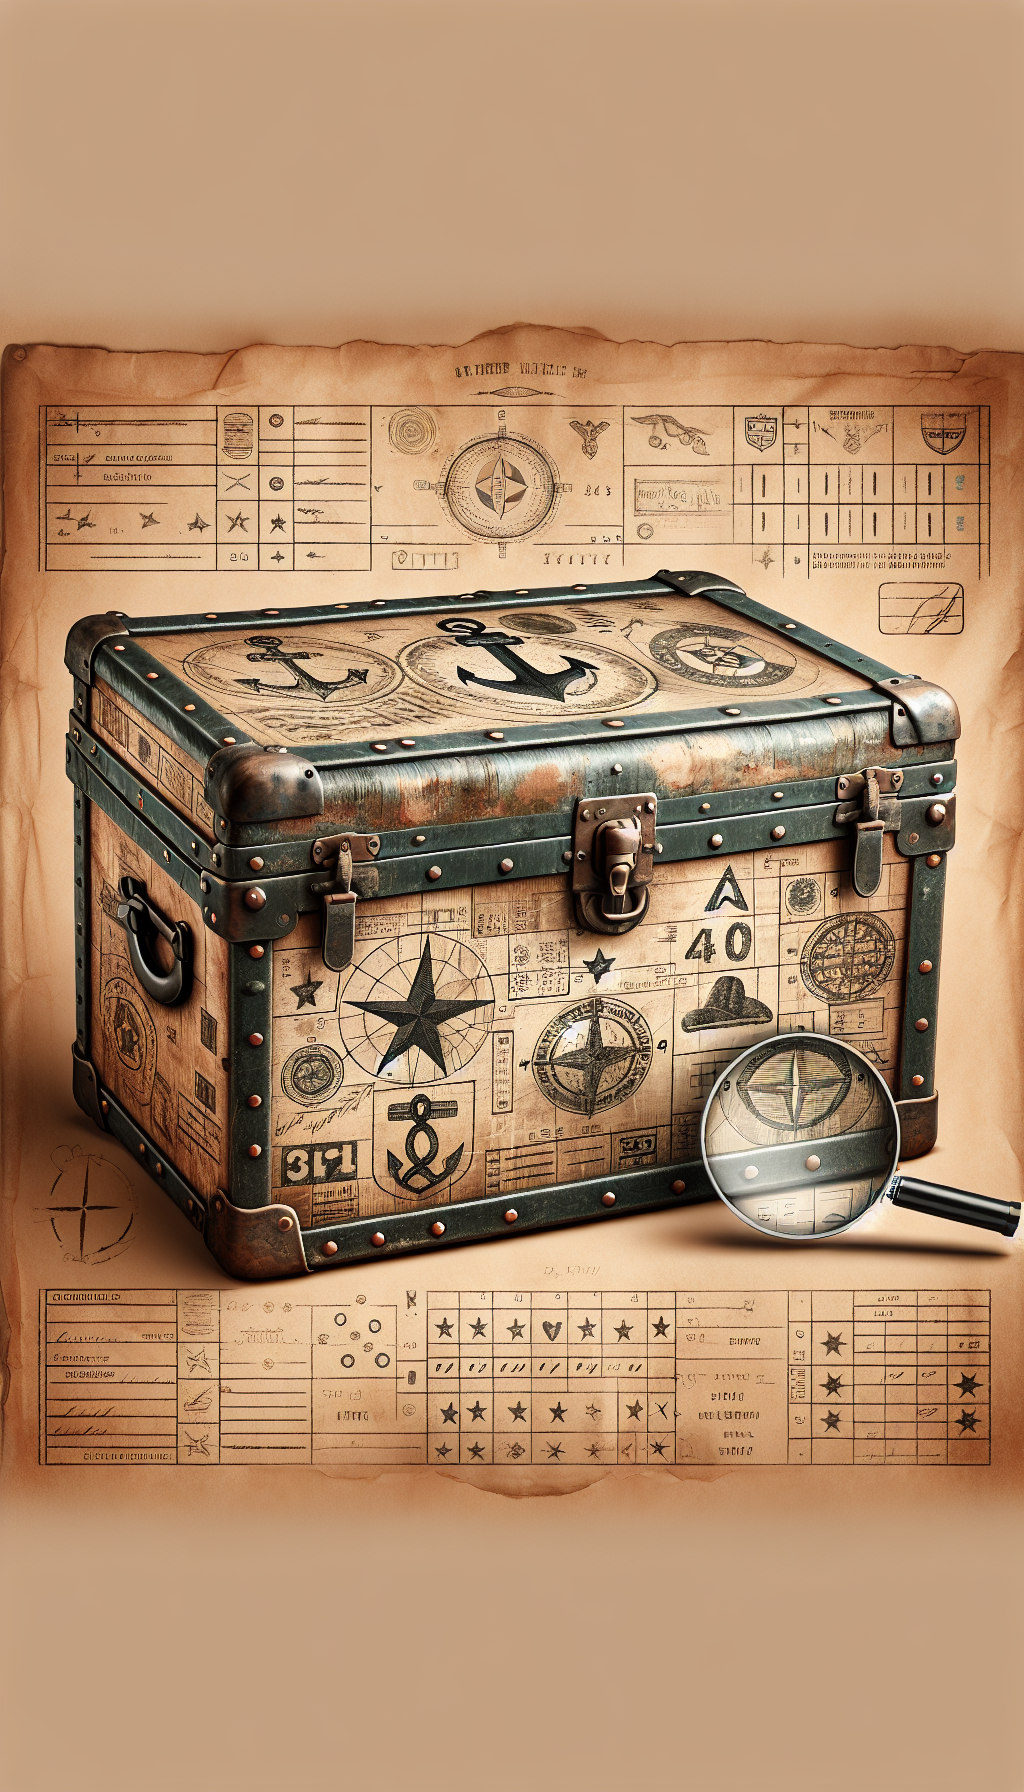 An illustration showing a weathered antique military trunk against a parchment backdrop, with its surface adorned with various faded and distinct marks – stars, anchors, unit numbers – each connected by fine lines to a magnifying glass that reveals their meaning and origin. Styles vary from photorealistic trunk textures to vintage line drawings for the symbols and annotations.